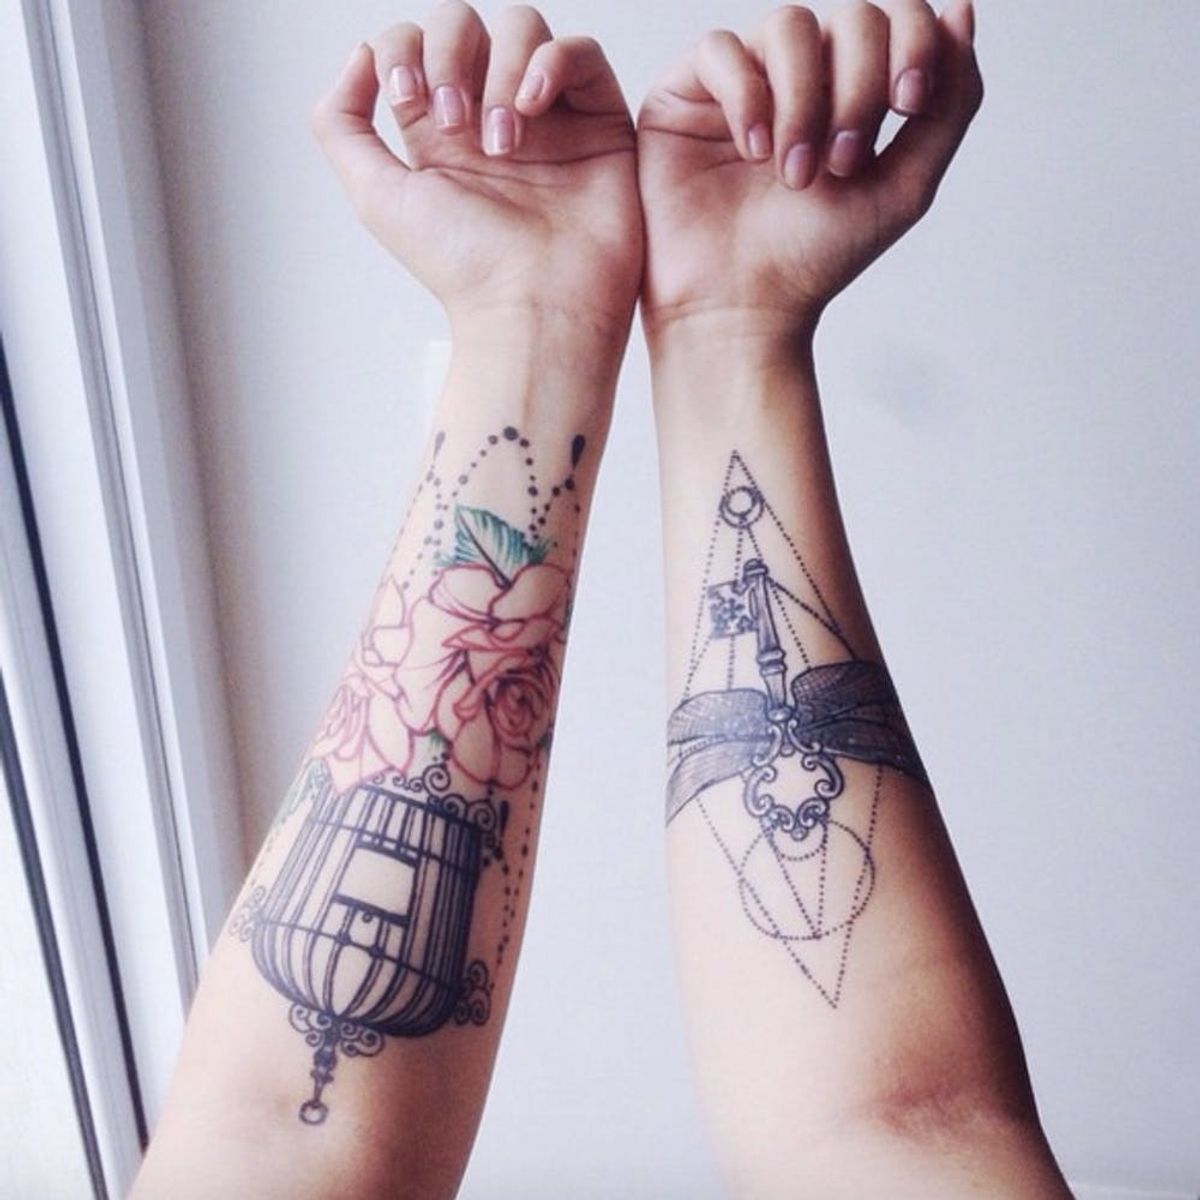 10 Magical Harry Potter Tattoos That Will Make You Want to Get Inked